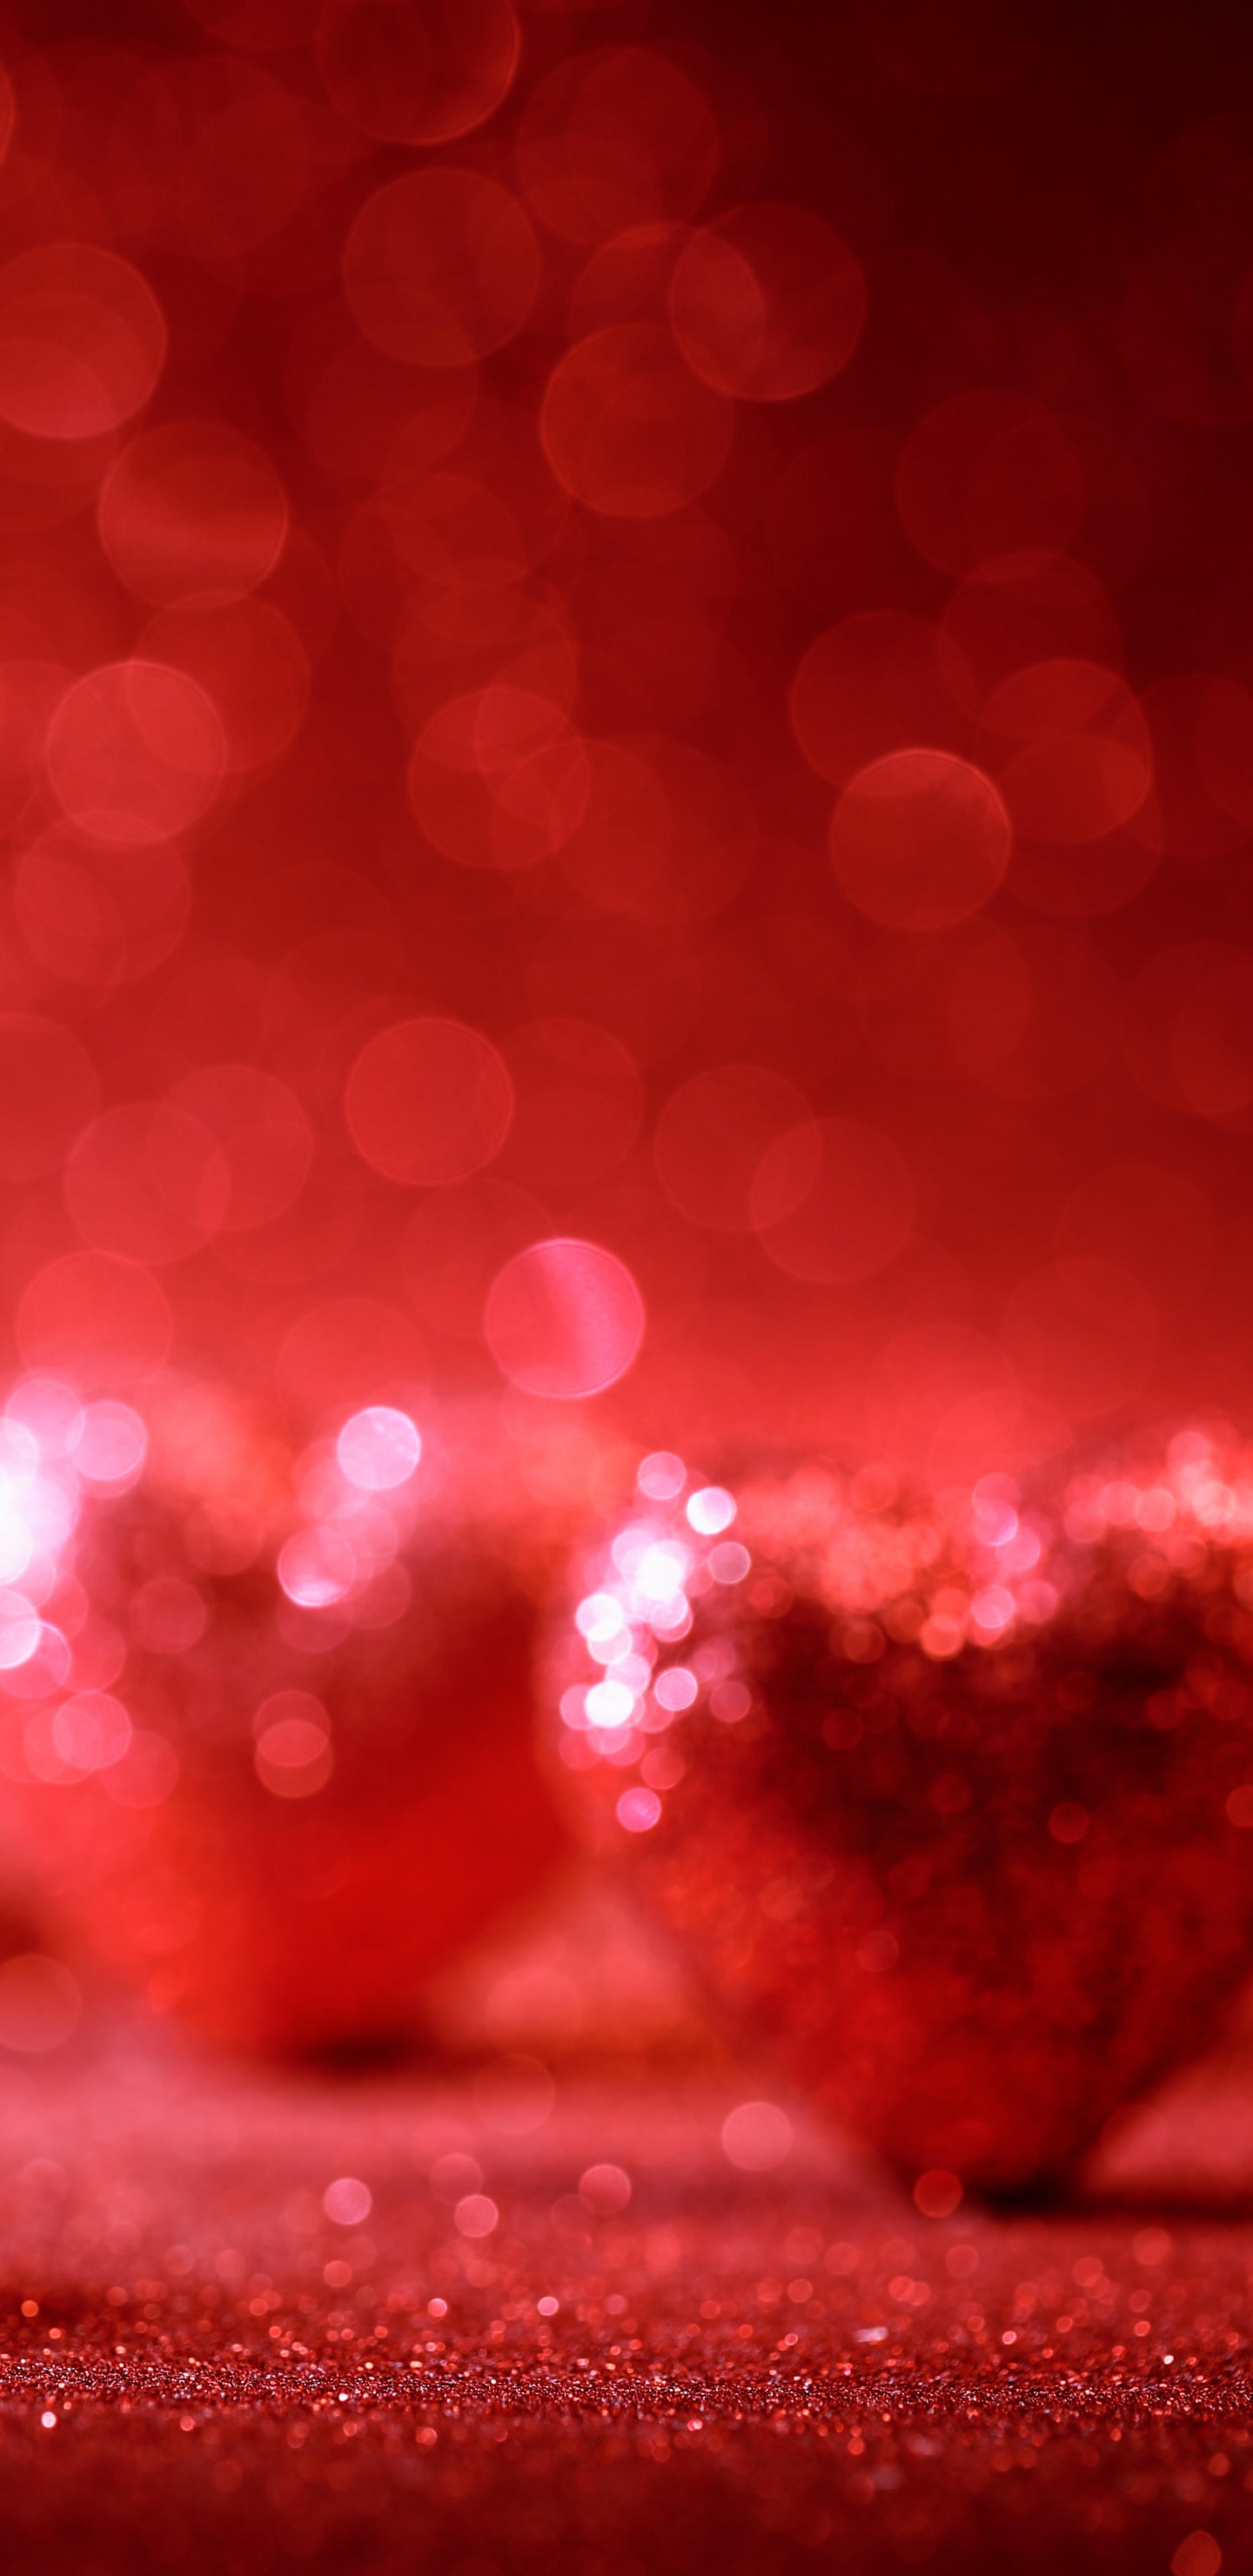 Valentines Day, Heart, Red, Love, Romance. Wallpaper in 1440x2960 Resolution